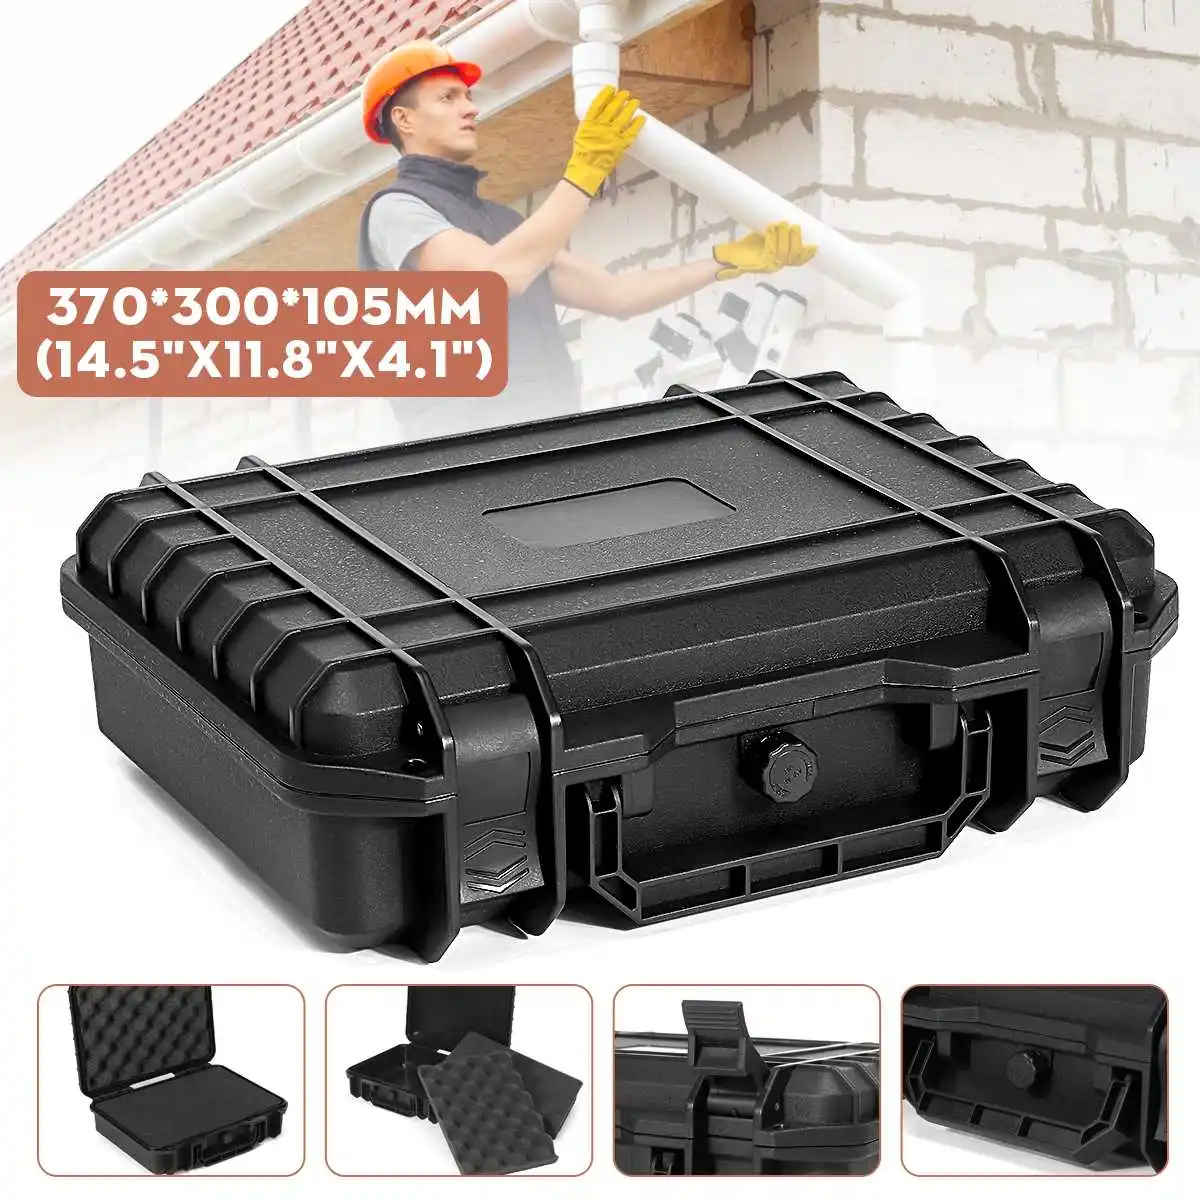 Tool Box Hardware Equipment Protection Safety Box Moisture-proof Instrument Case Suitcase Camera Protect Outdoor Box With Sponge